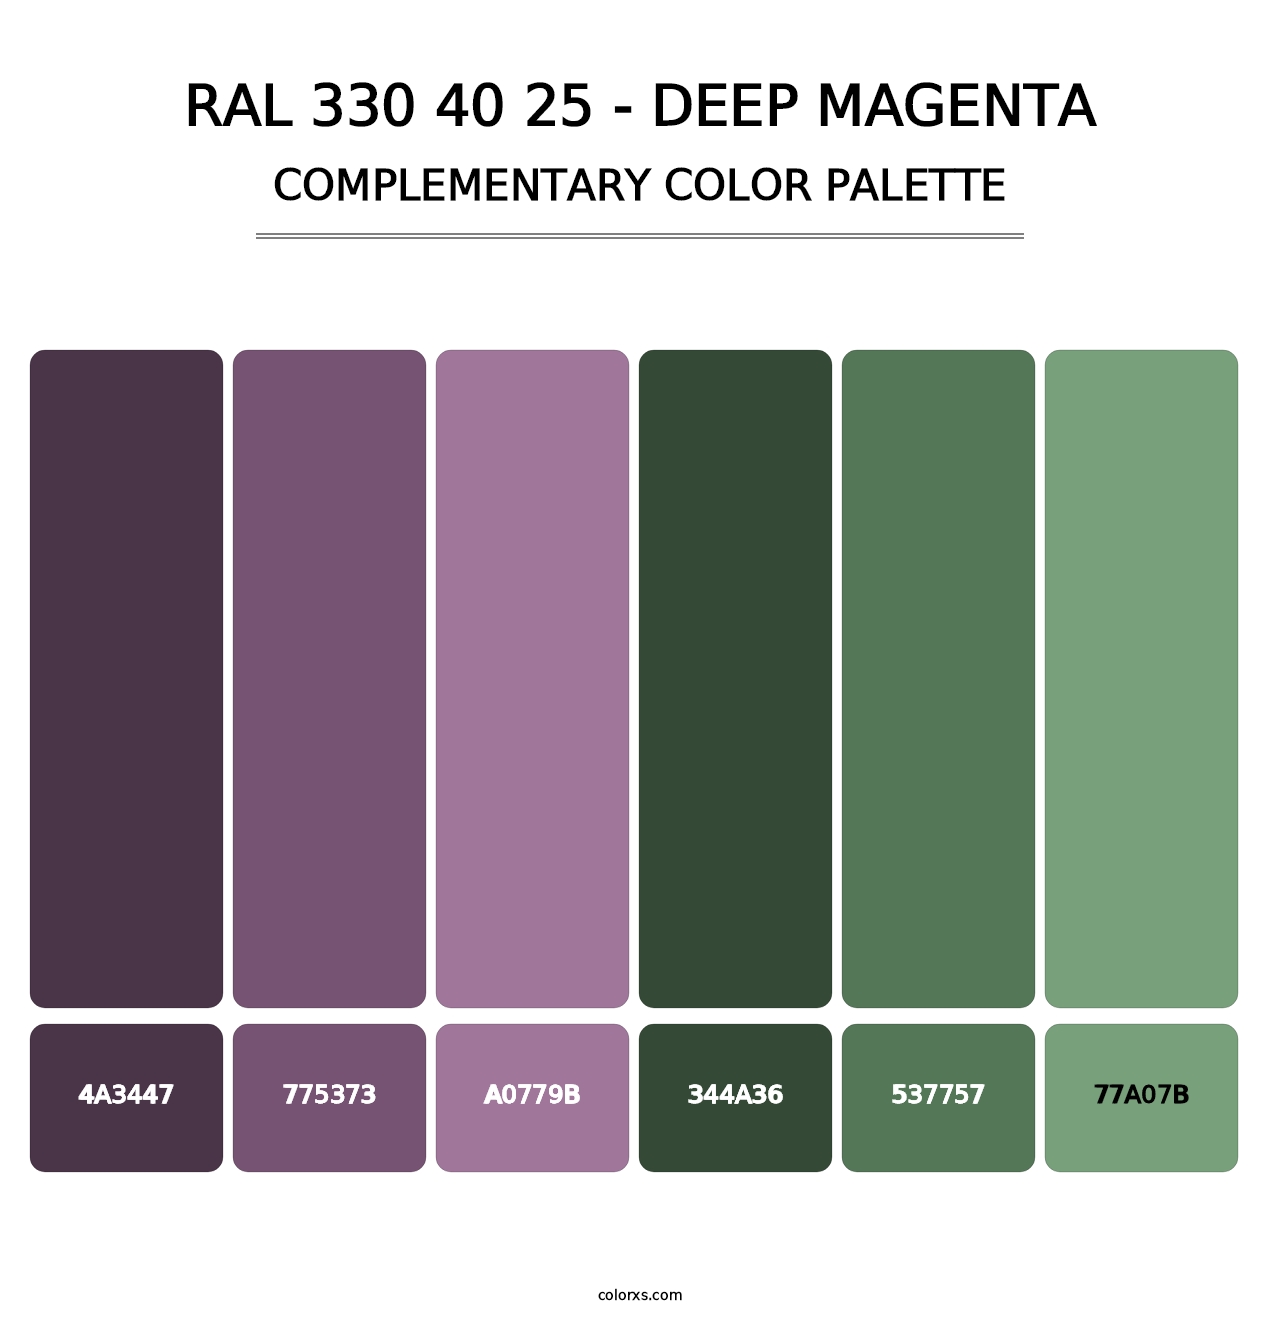 RAL 330 40 25 - Deep Magenta - Complementary Color Palette